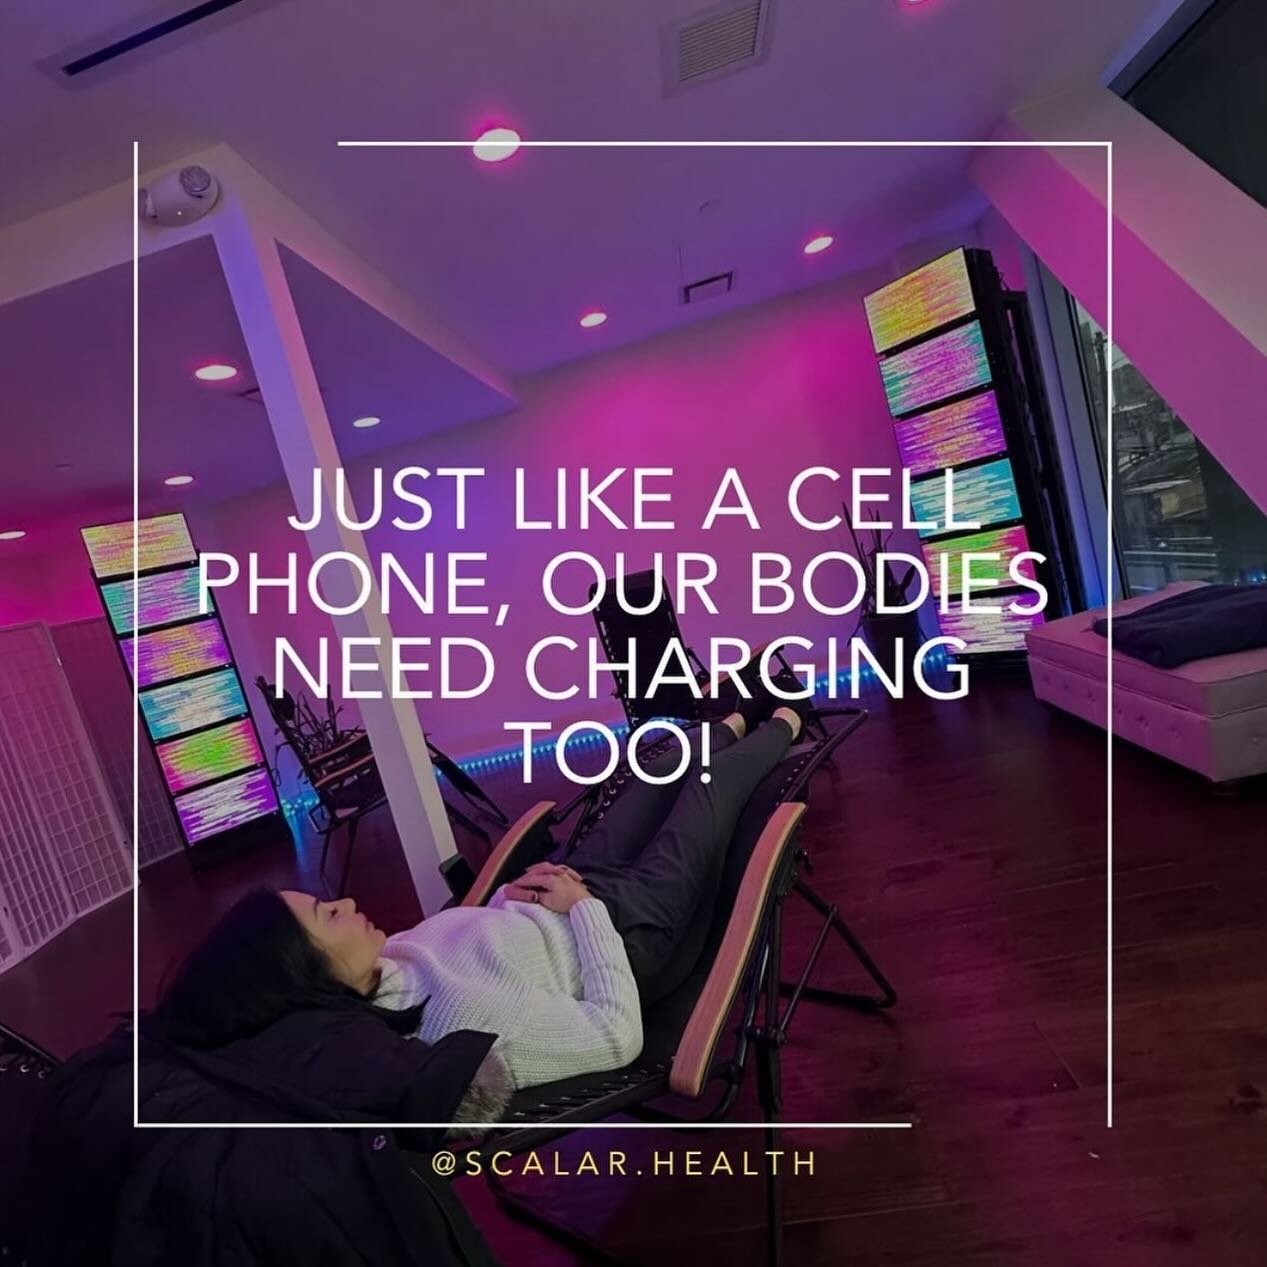 Just like a cell phone, our bodies need charging too! To use your phone it must remain charged, our bodies also need a charge of 70-90 millivolts to maintain optimal health. Get your charge at Scalar. Health.